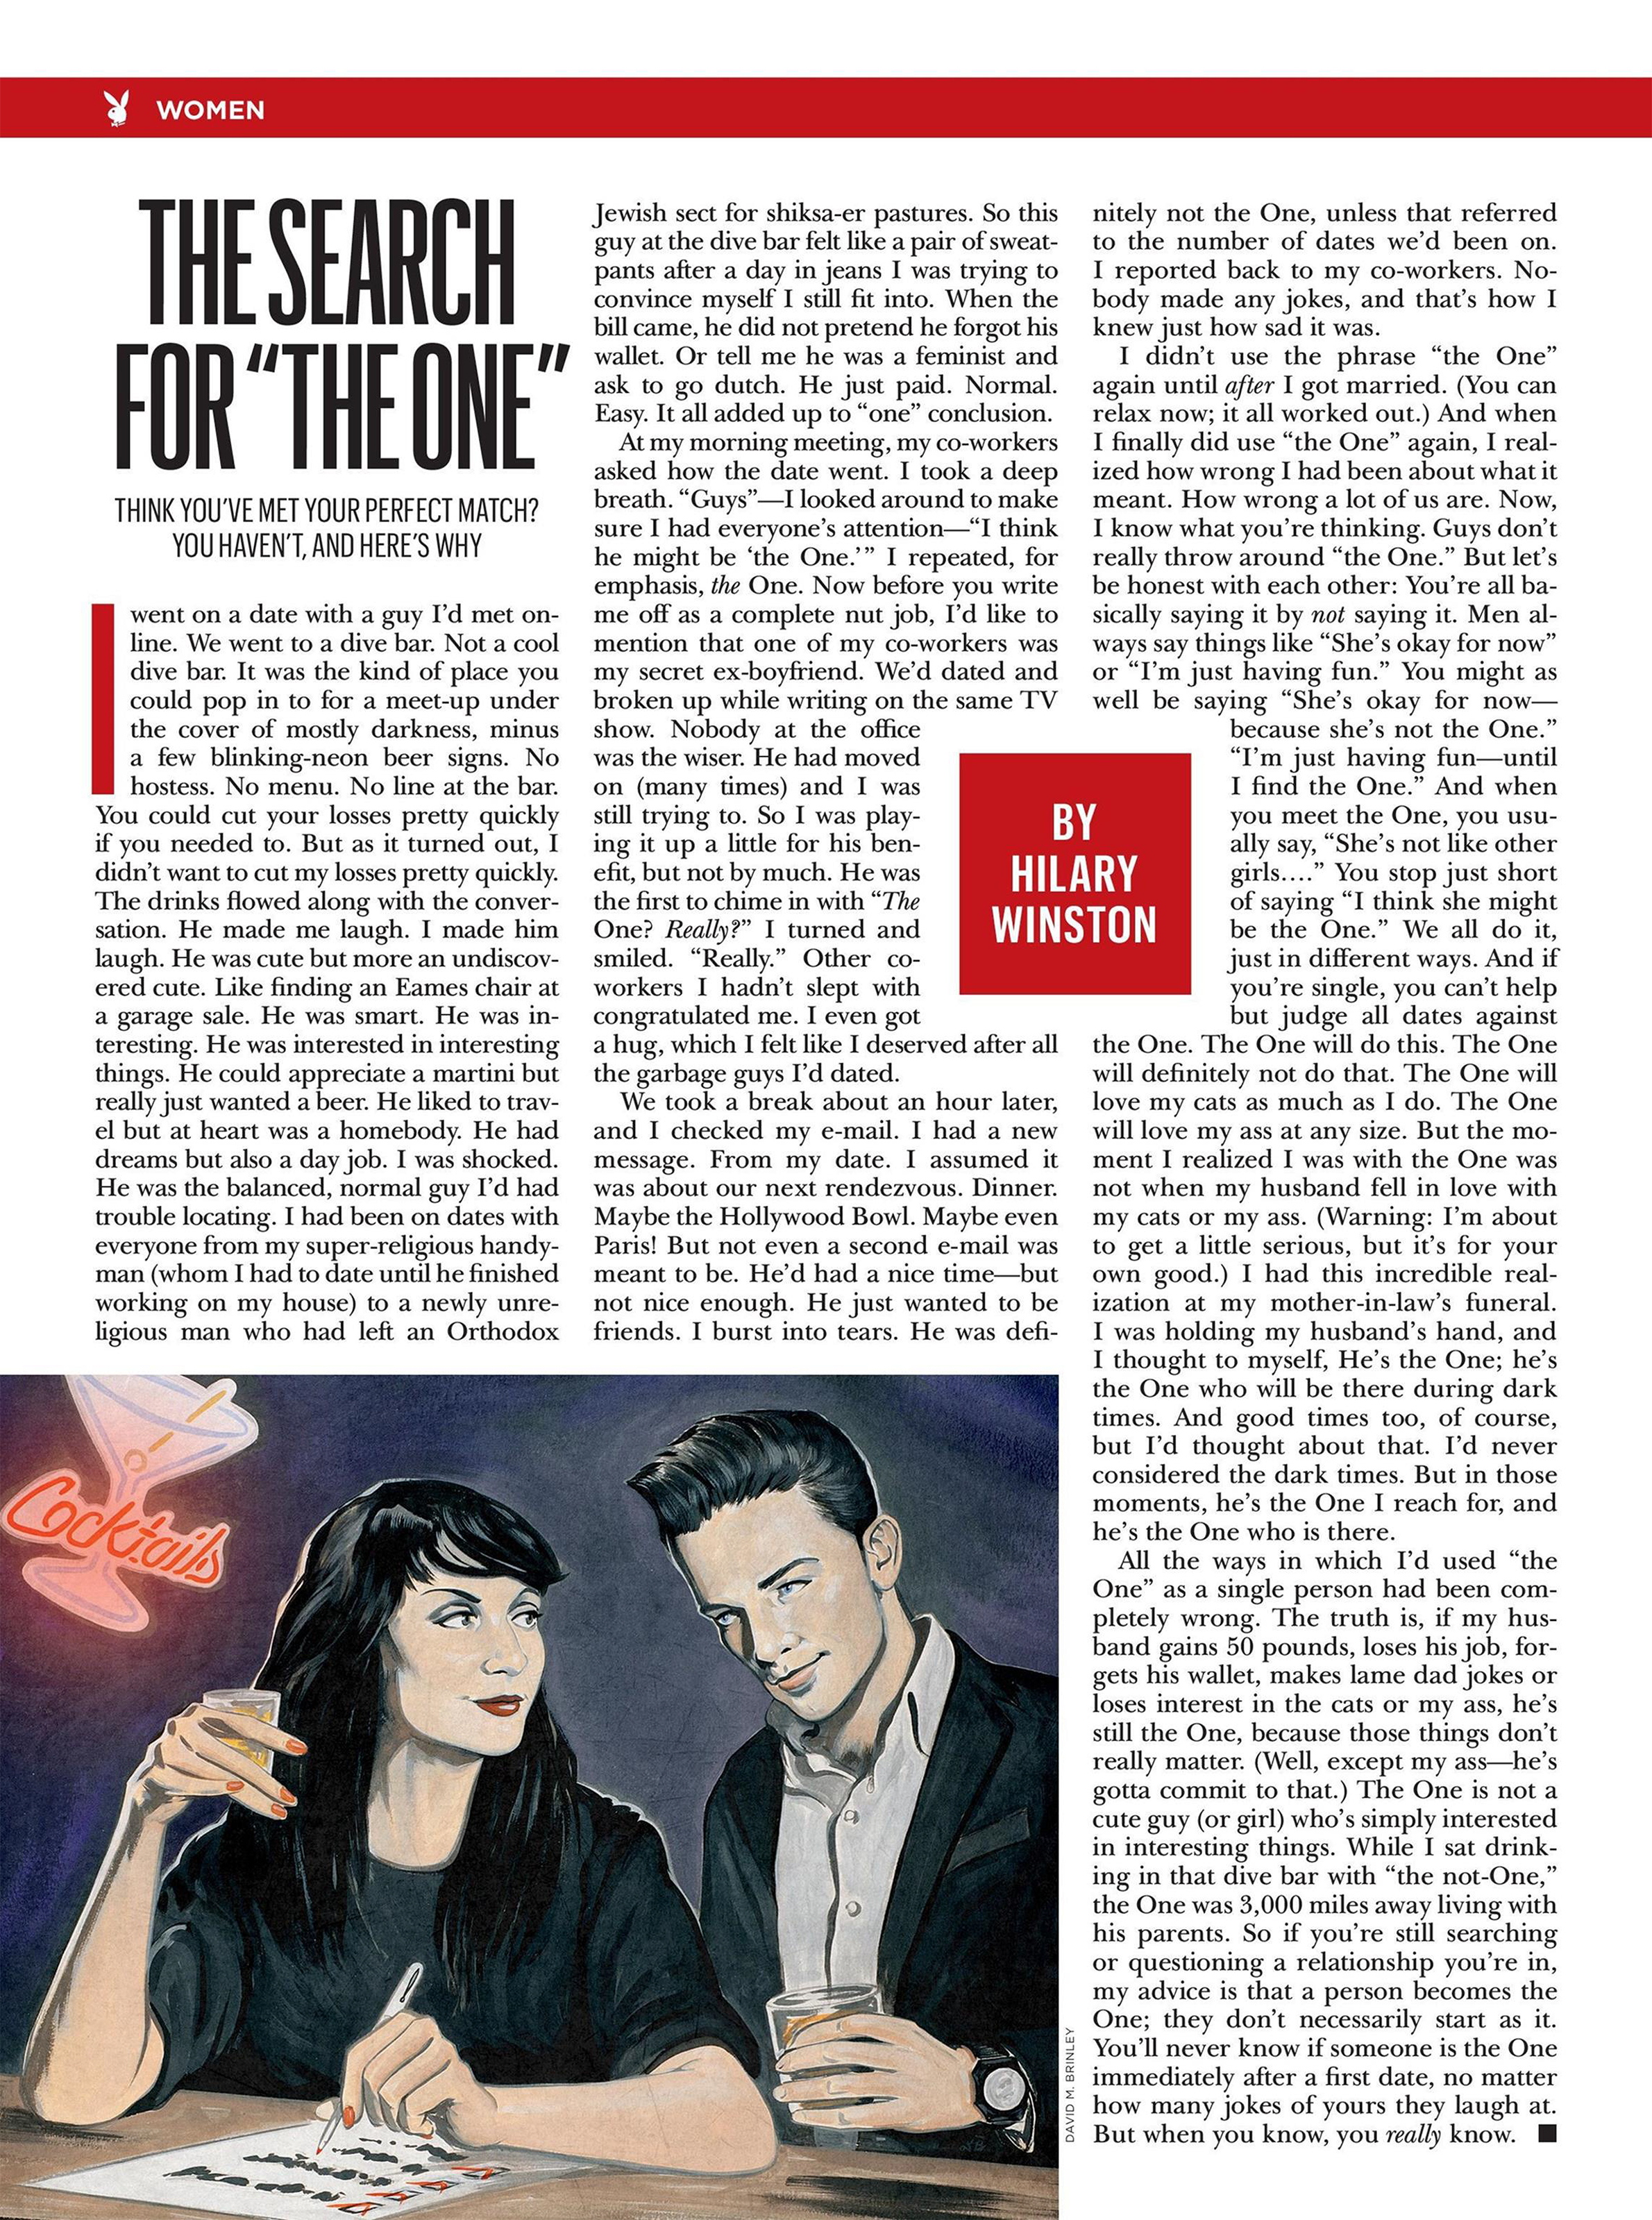   The Search For "The One"&nbsp; | Playboy magazine December 2015 